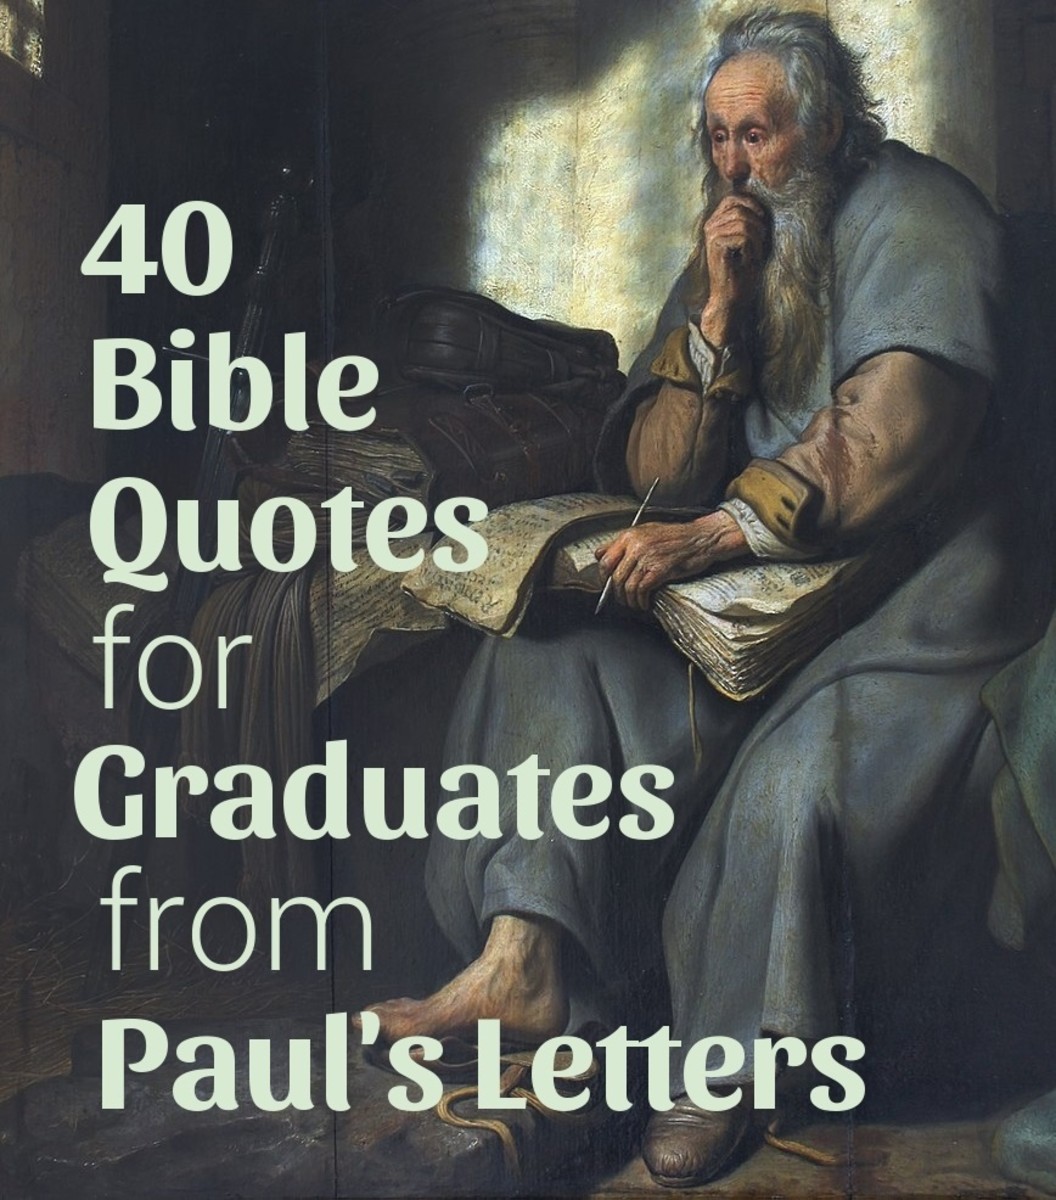 40 Bible Quotes for Graduates from Paul's Letters